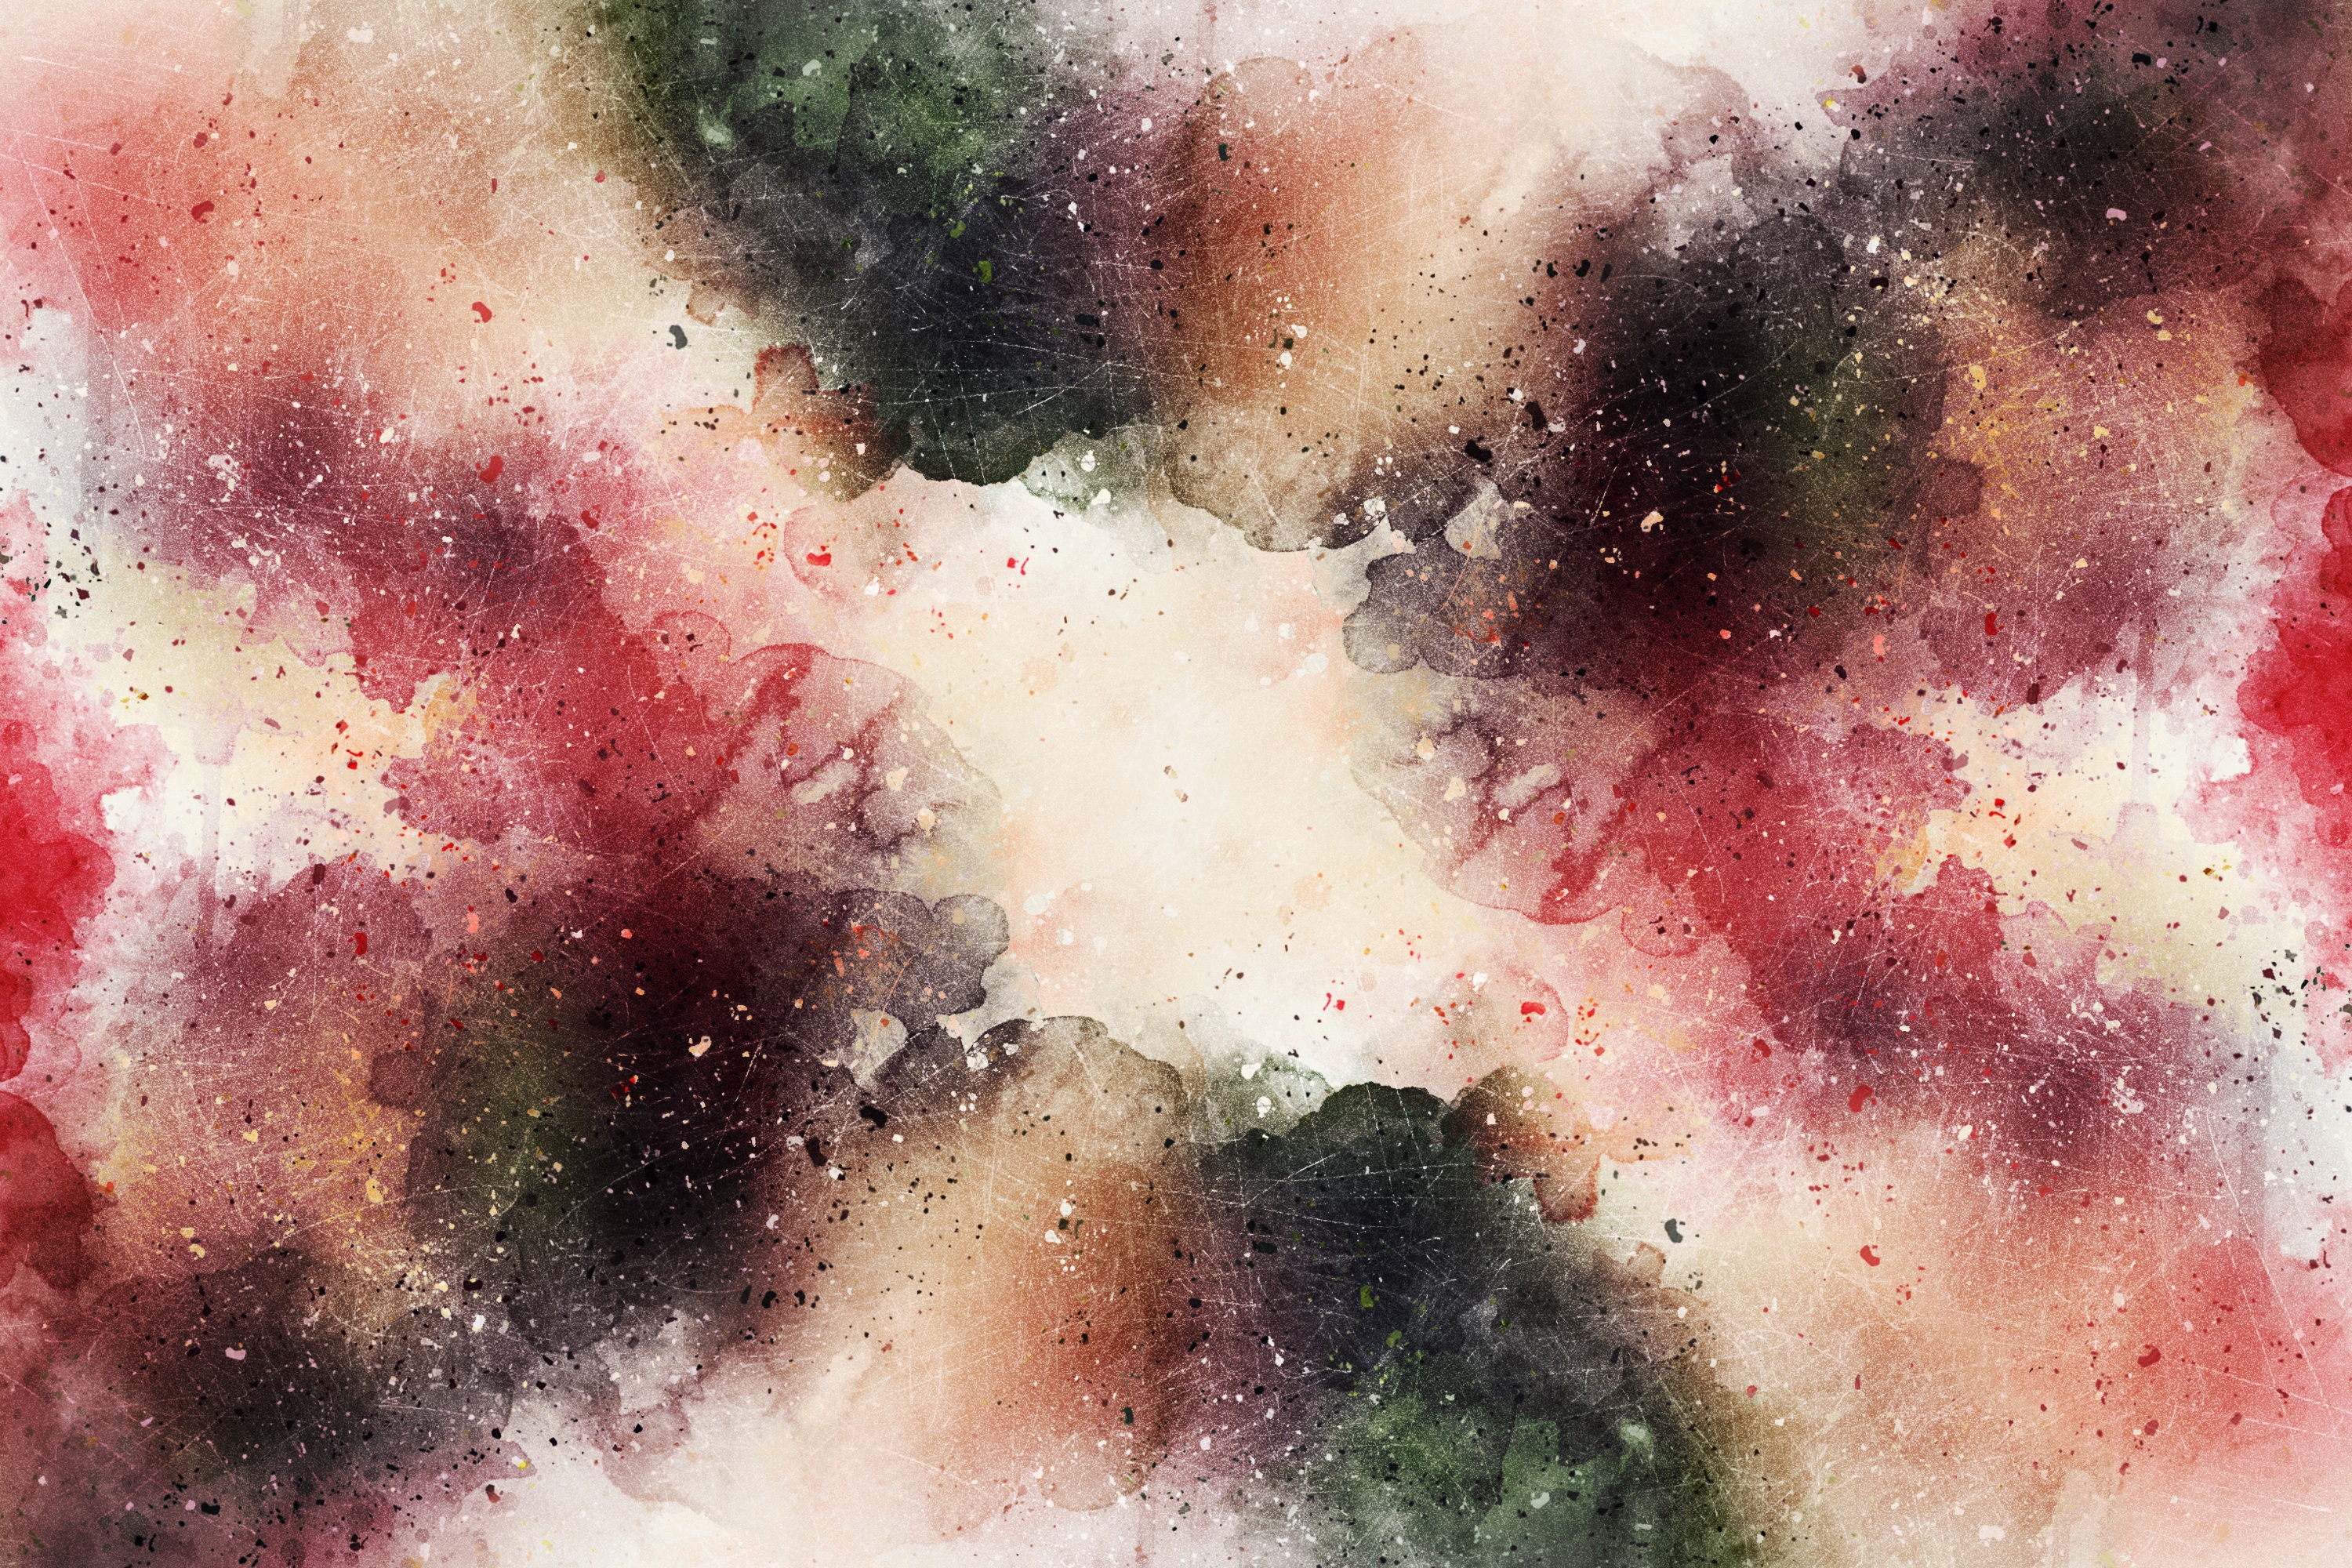 Windows Backgrounds stains, spots, abstract, watercolor